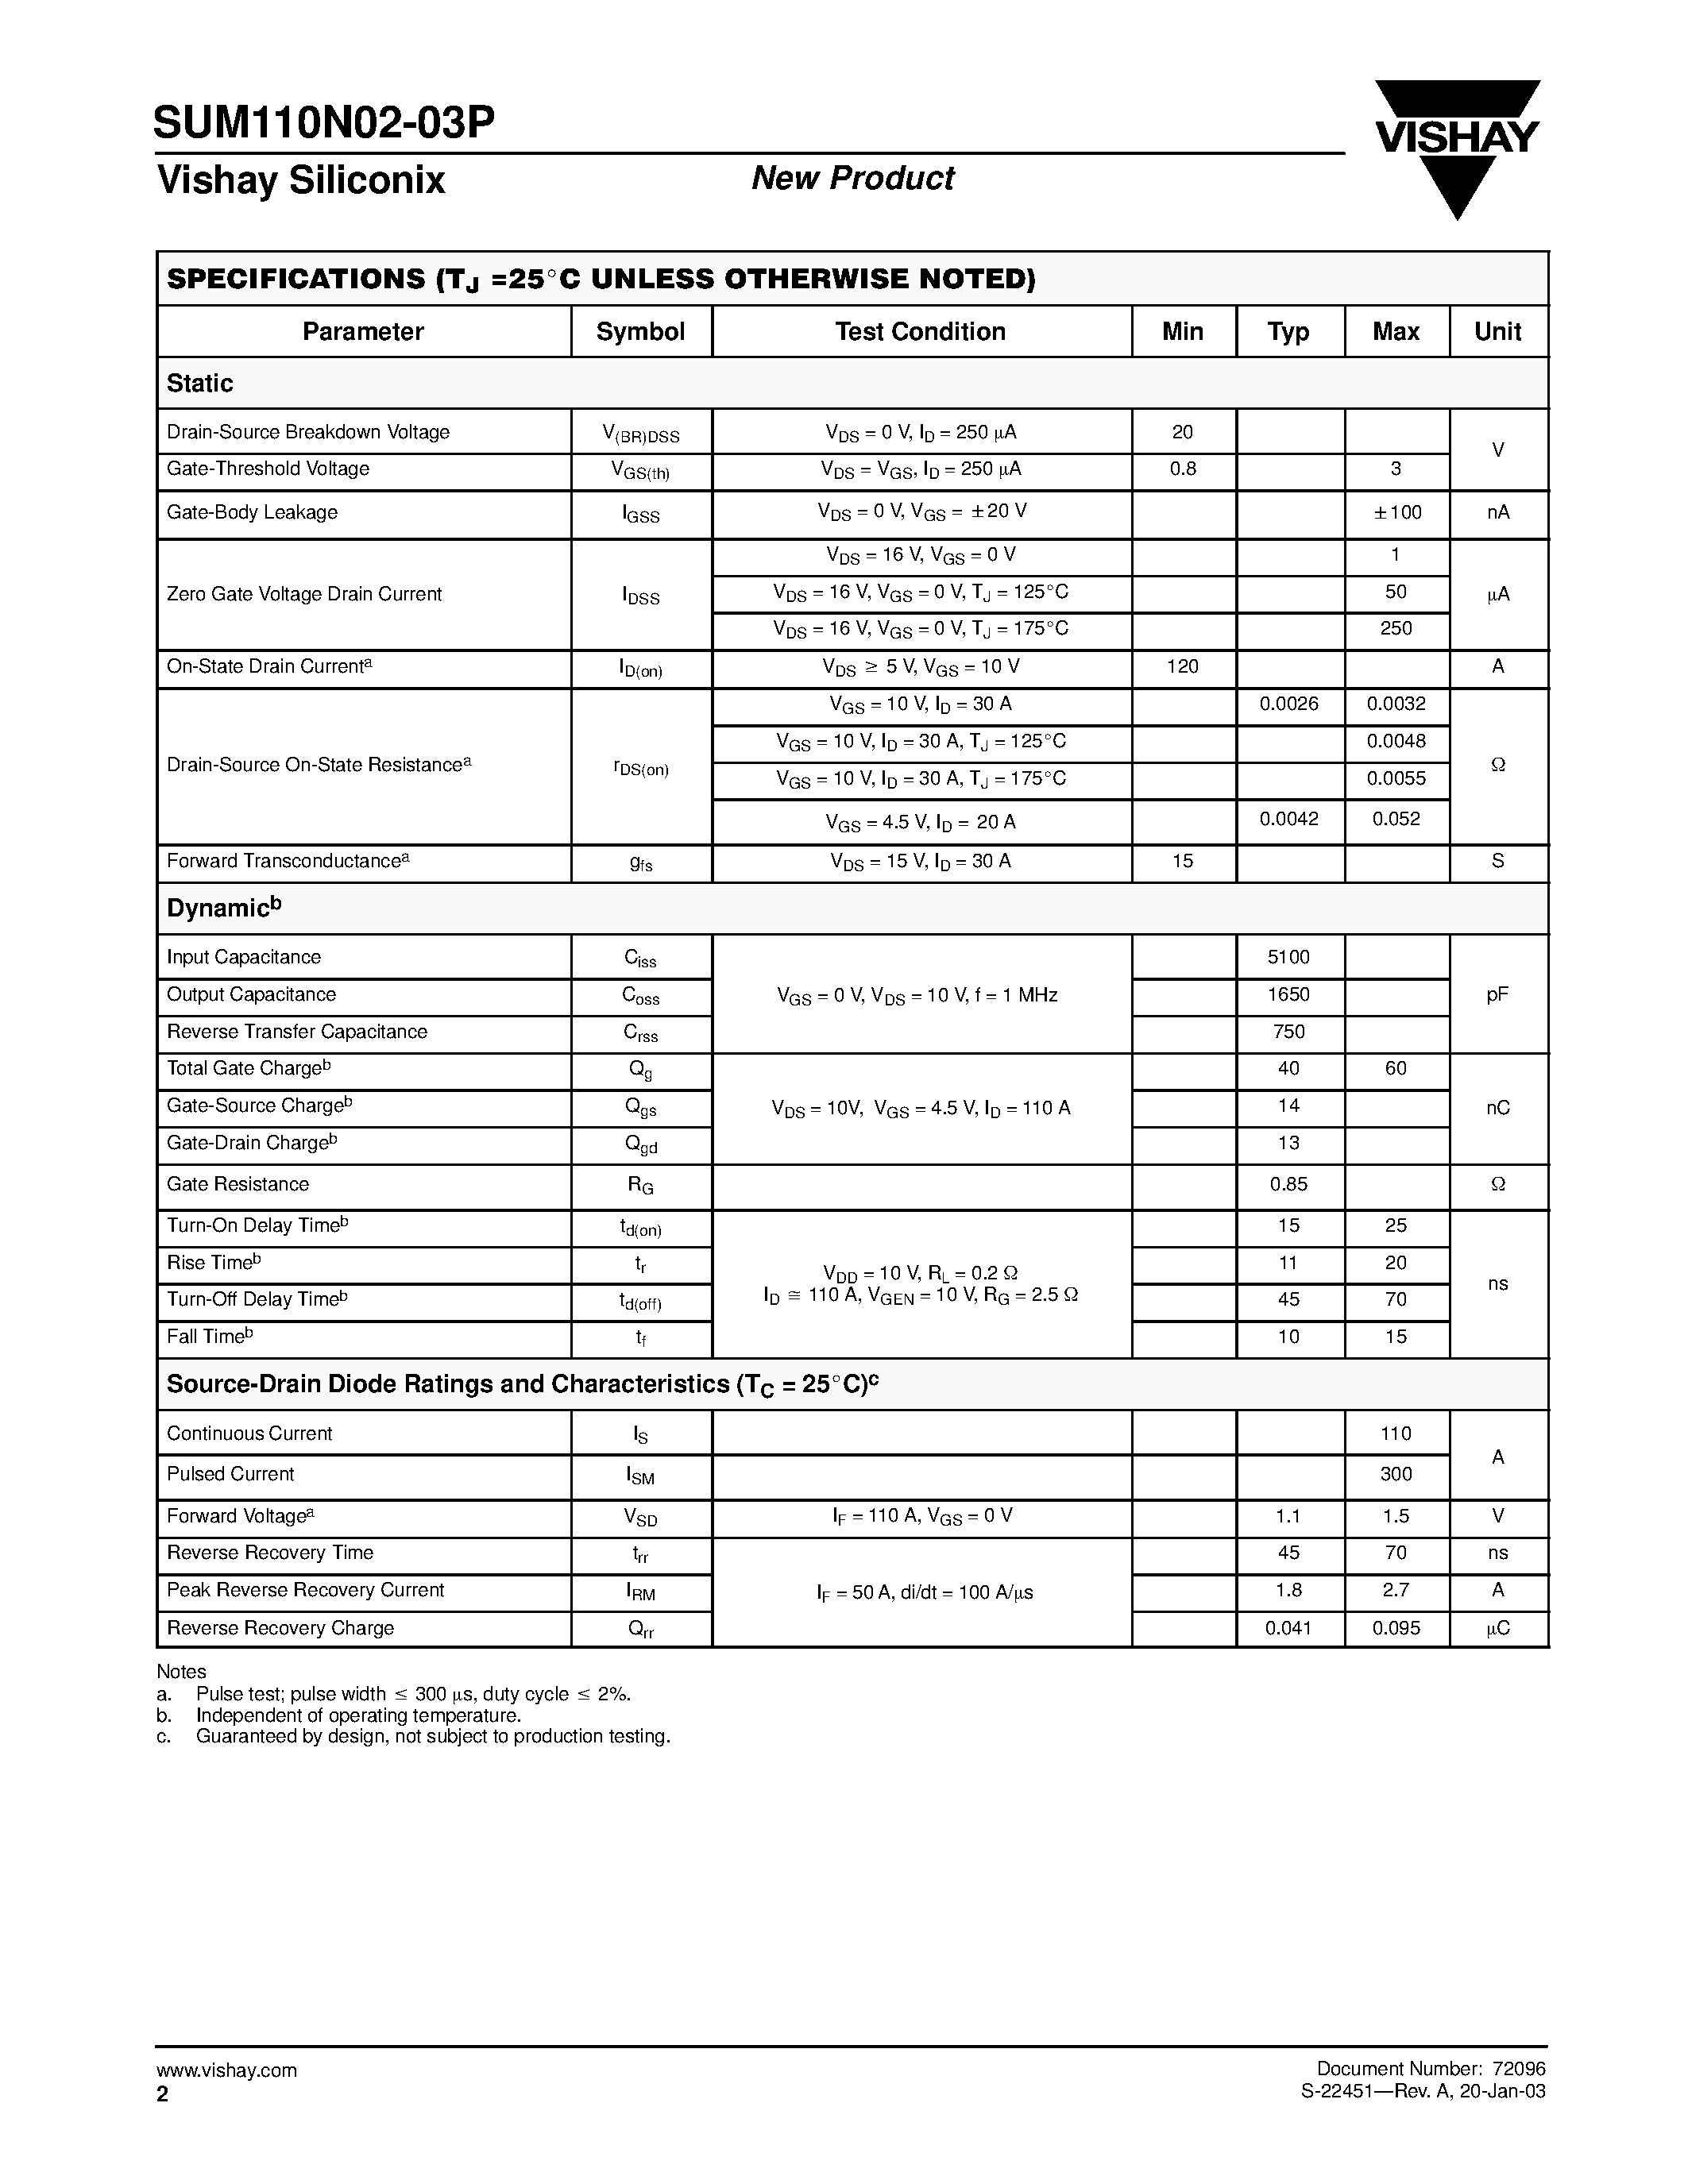 Datasheet SUM110N02-03P - N-Channel 20-V (D-S) 175 C MOSFET page 2